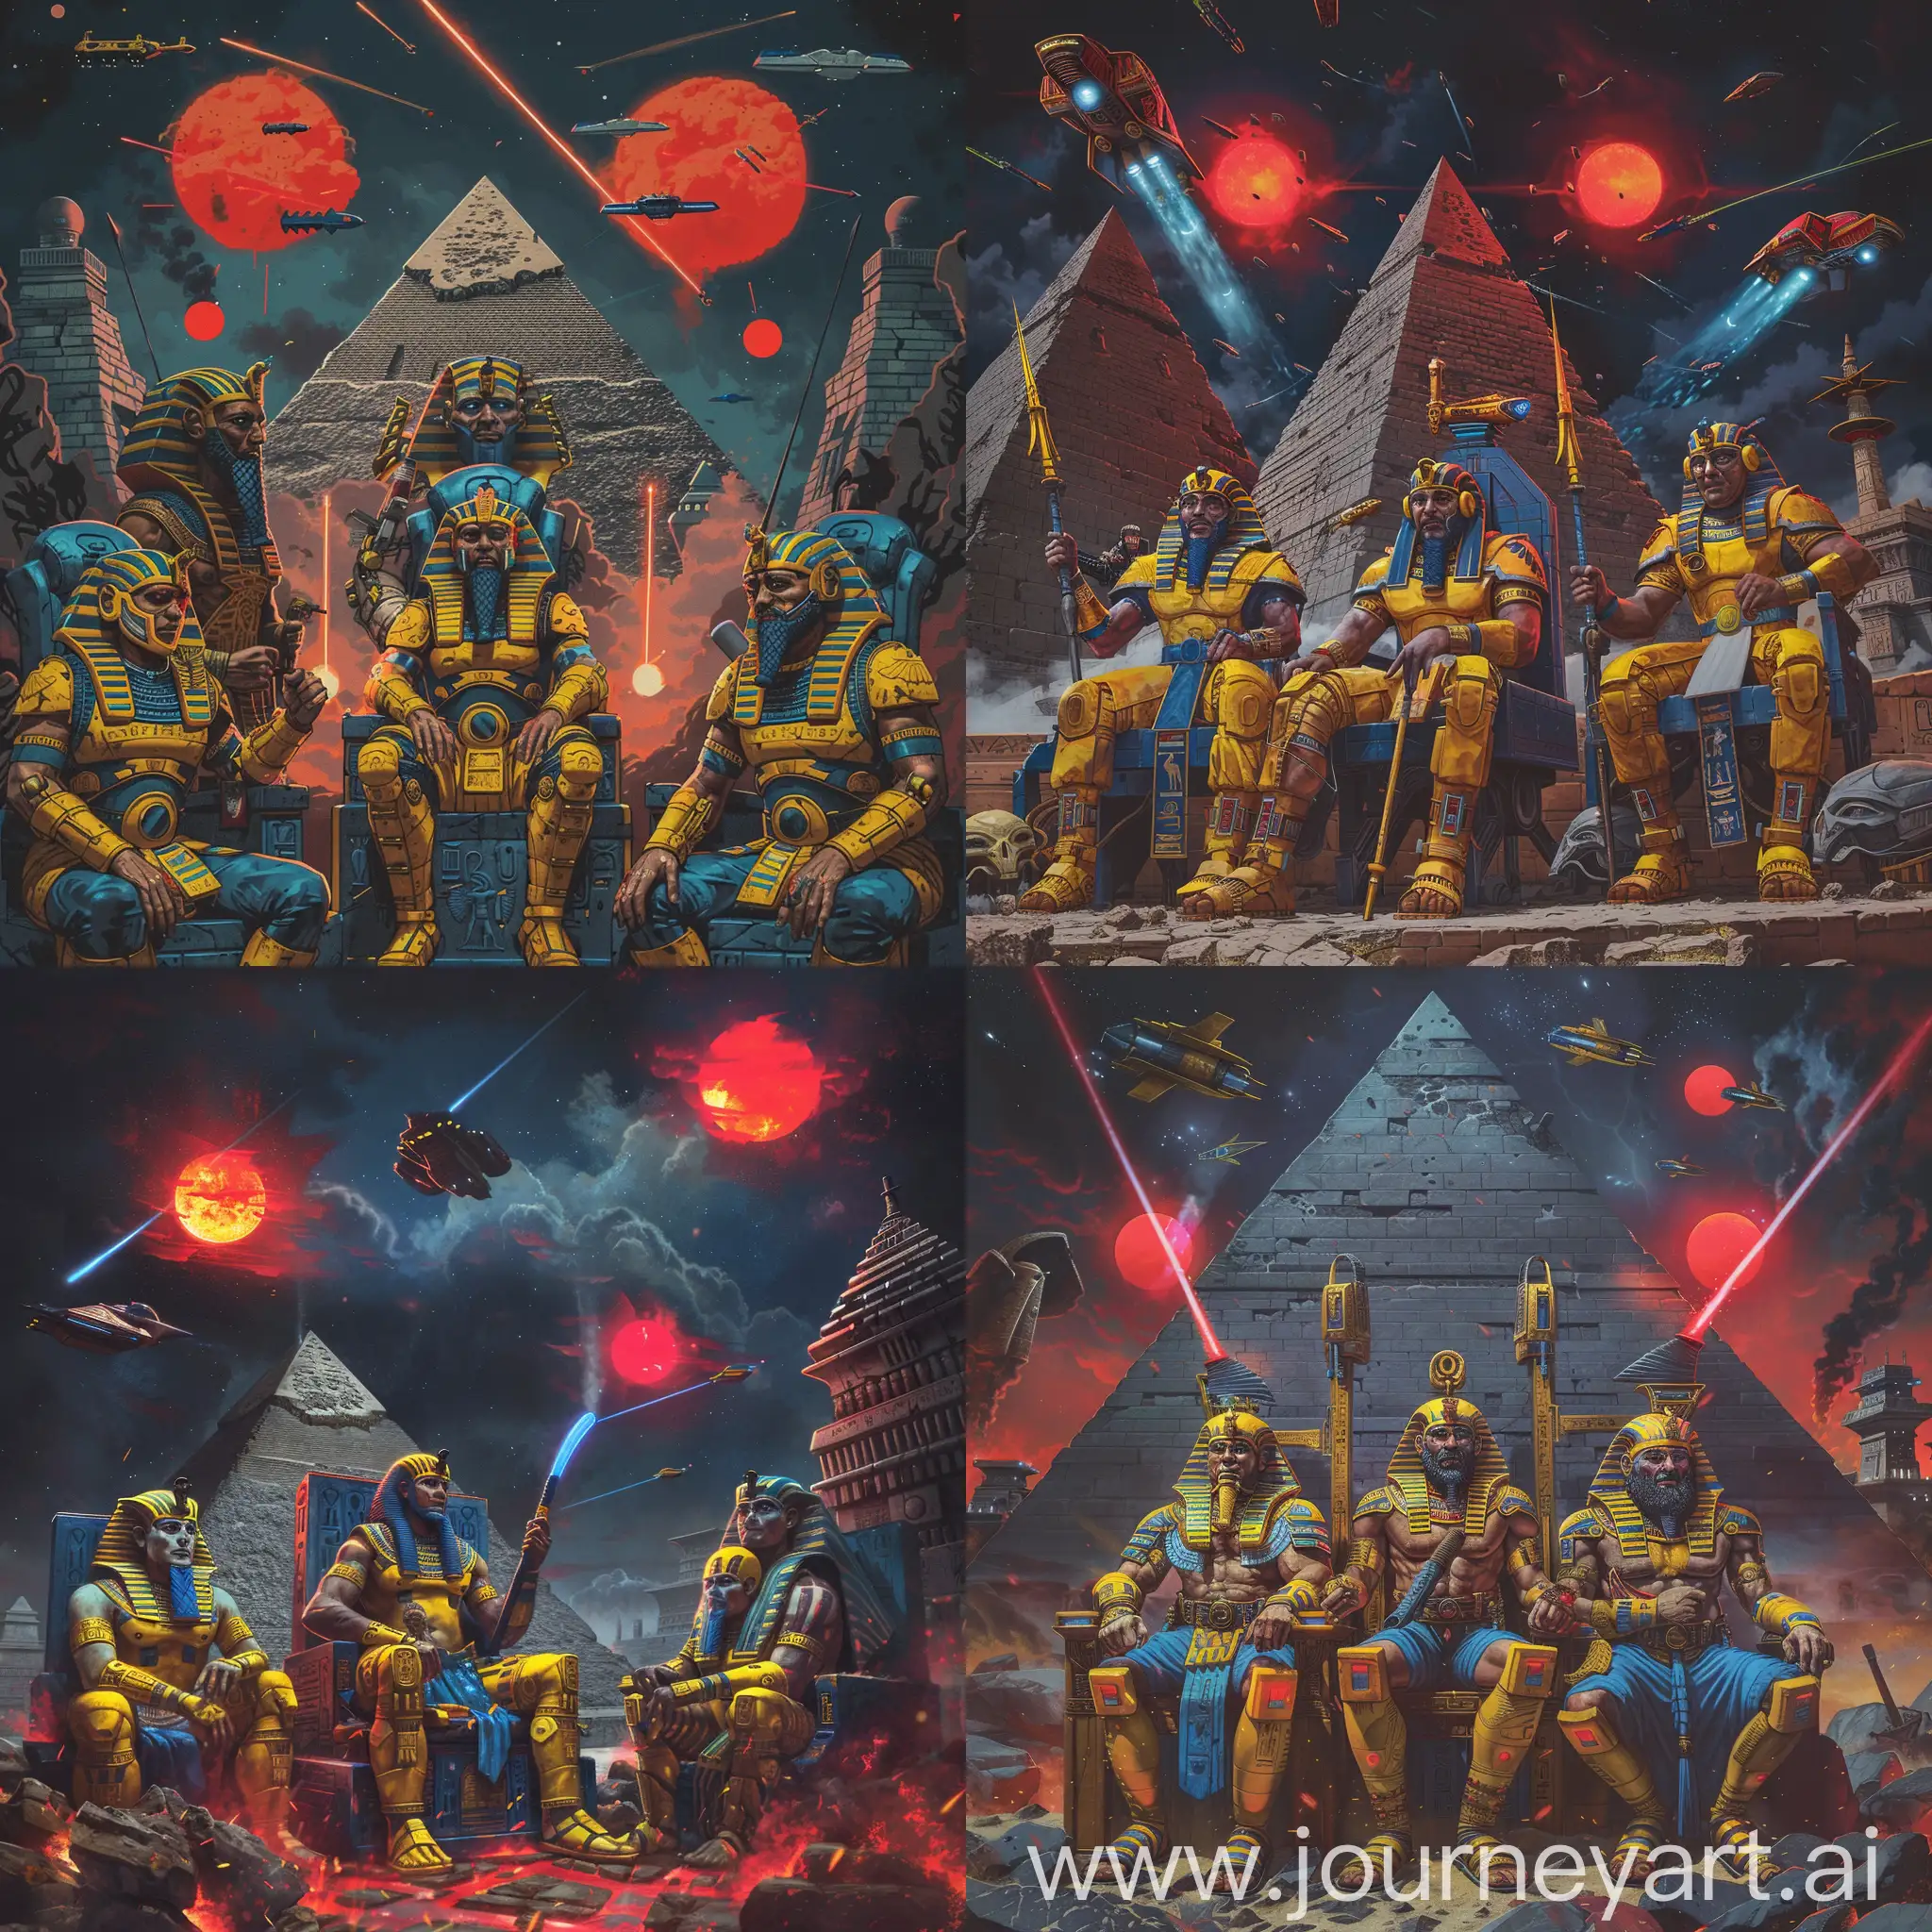 in the middle at left, a middle-aged Egyptian pharaoh Ramesses the Great, with Egyptian beards, in yellow and blue Egyptian style space marine armor, sits on his Egypt royal throne,

in the middle at right, a middle-aged Babylonian king Nebuchadnezzar II, with Babylonian beards, in yellow and blue Babylonian style space marine armor, sits on his Babylonian royal throne,

ancient Egyptian cyborgs soldiers in yellow blue armor are at left, hold laser spears,

ancient Babylonian cyborgs soldiers in yellow blue armor are at right, hold laser spears,

a futuristic steel gray pyramid is at left in the background, another futuristic steel gray ziggurat is at right in the background,

three red suns in the dark sky, with Egyptian style Spaceships at left and Babylonian style Spaceships at right in the sky,